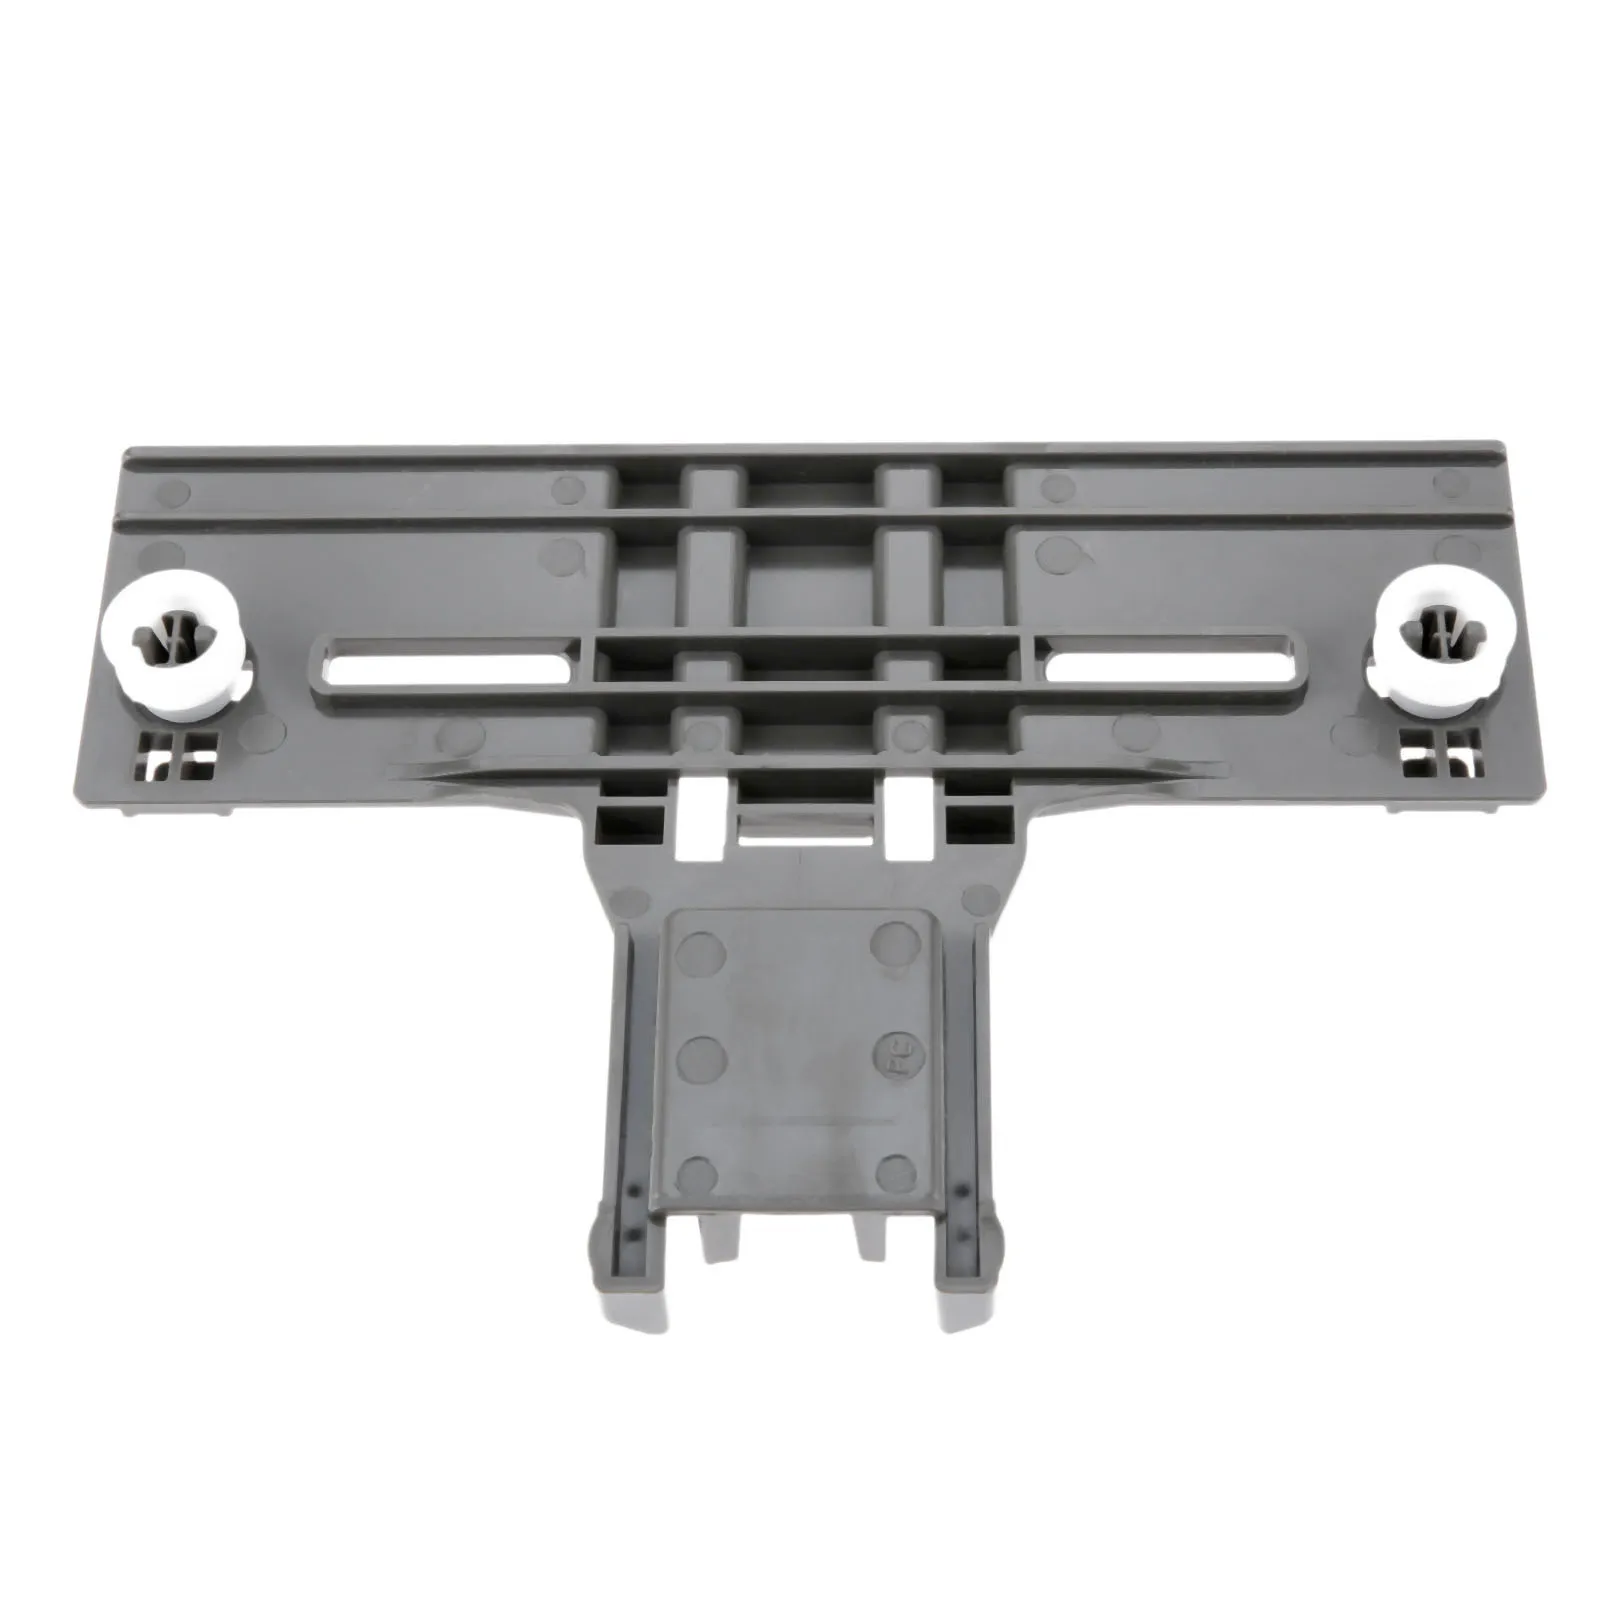 

1Pc Dishwasher Upper Rack Adjuster Replacement Fits for Whirlpool KitchenAid Kenmore Jenn-Air W10350376 AP5272176 W10238418